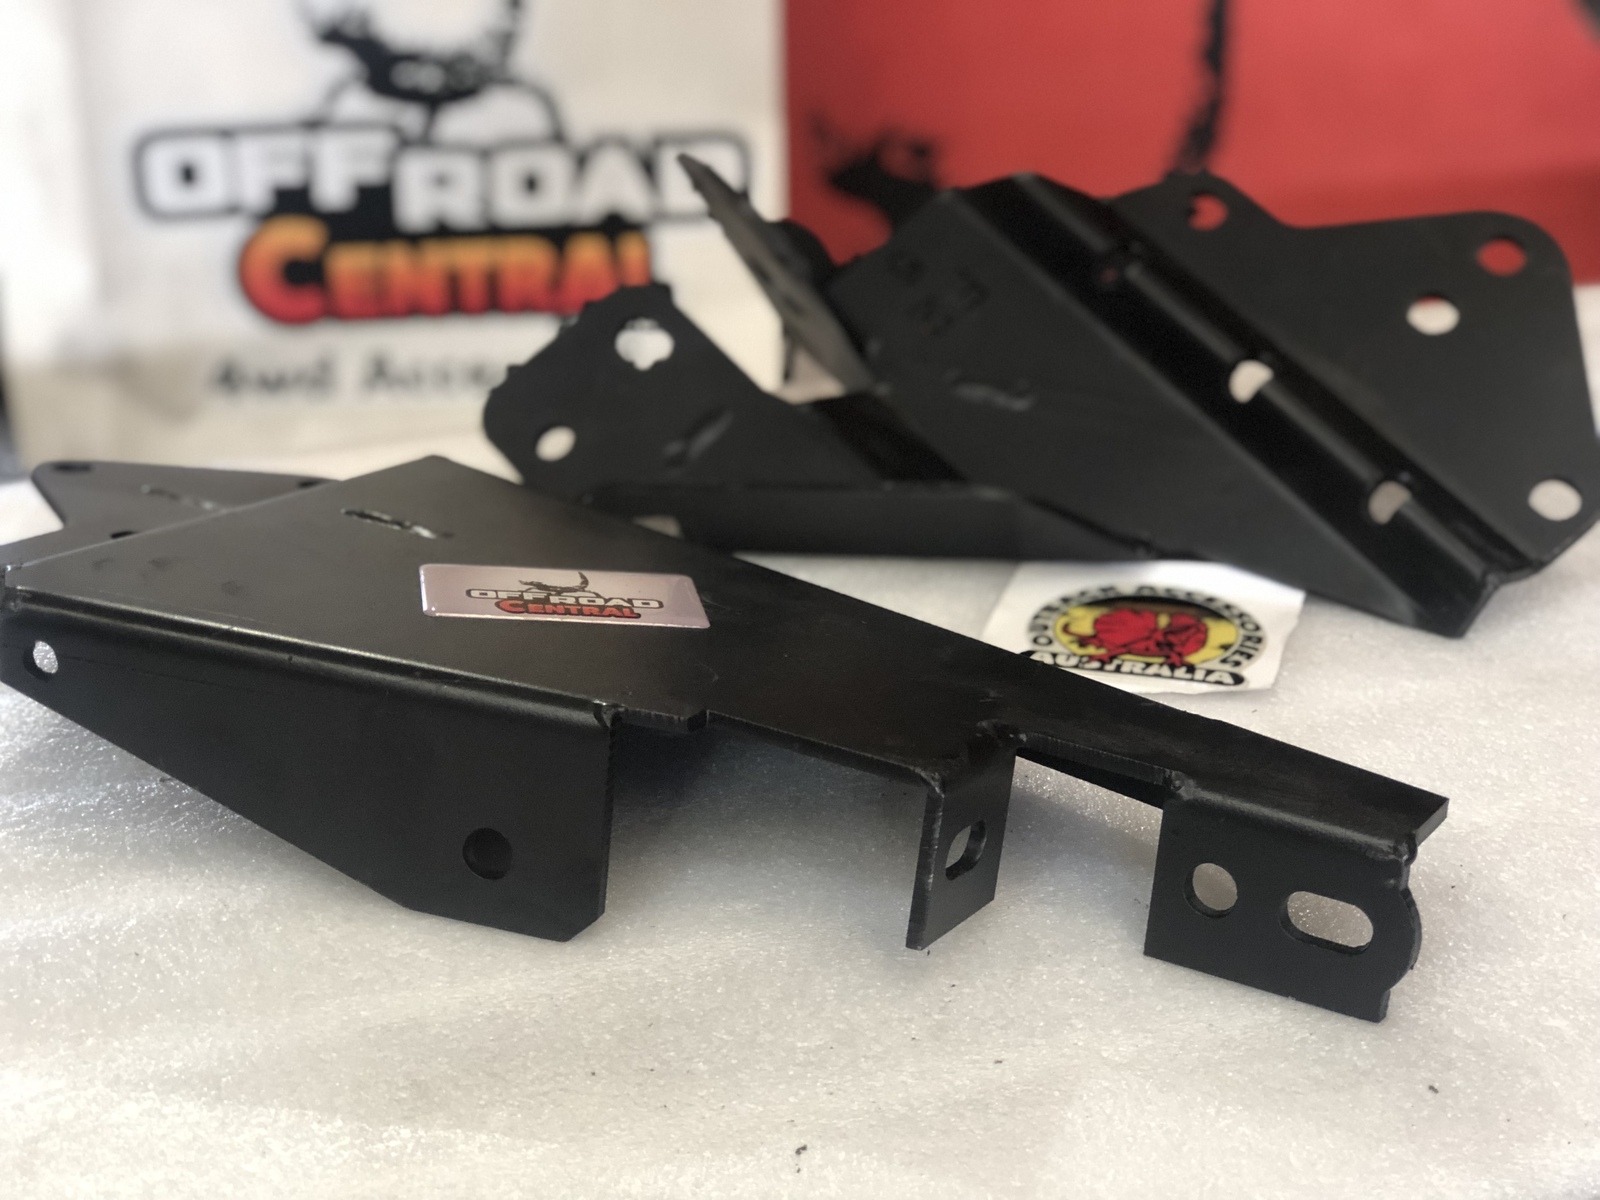 XROX 2" BODY LIFT BRACKETS- AVAILABLE FOR VARIOUS VEHICLES